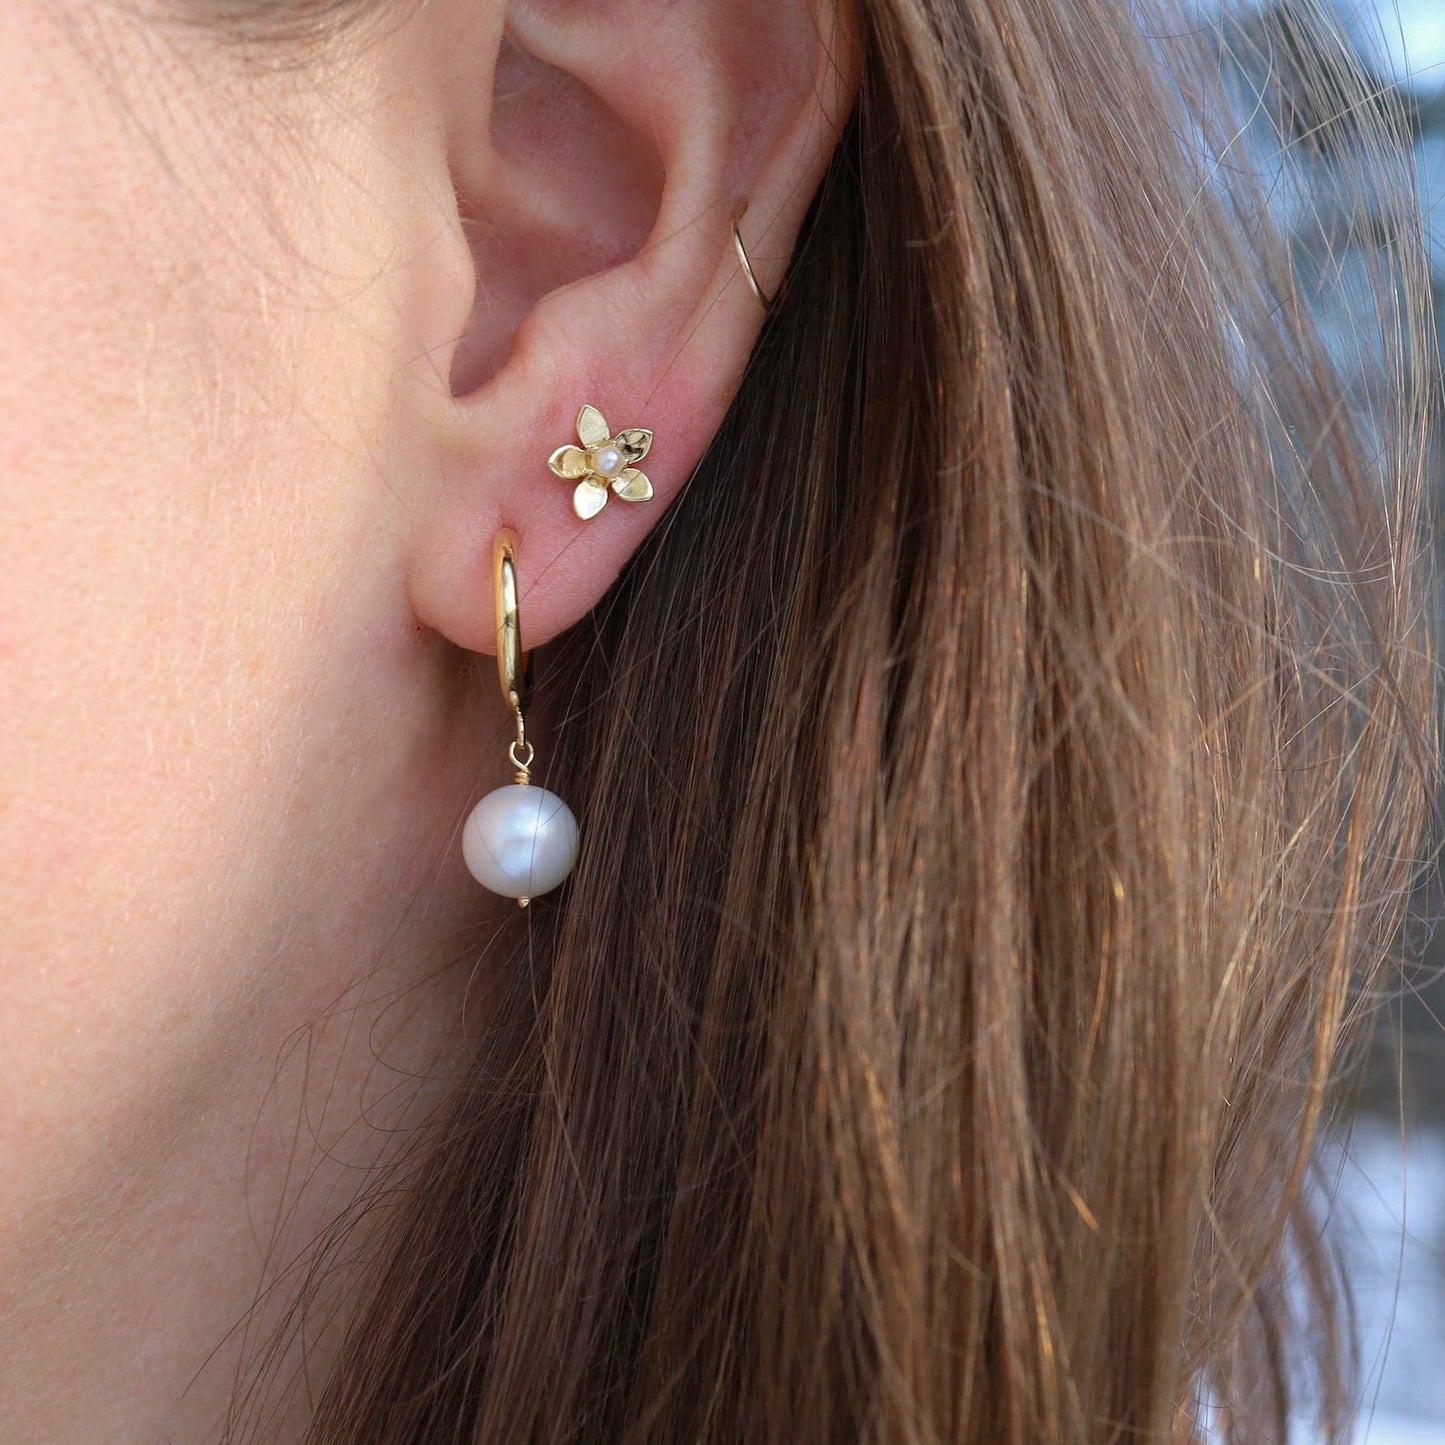 EAR-VRM Flower Stud with Tiny Pearl Center in Gold Vermeil